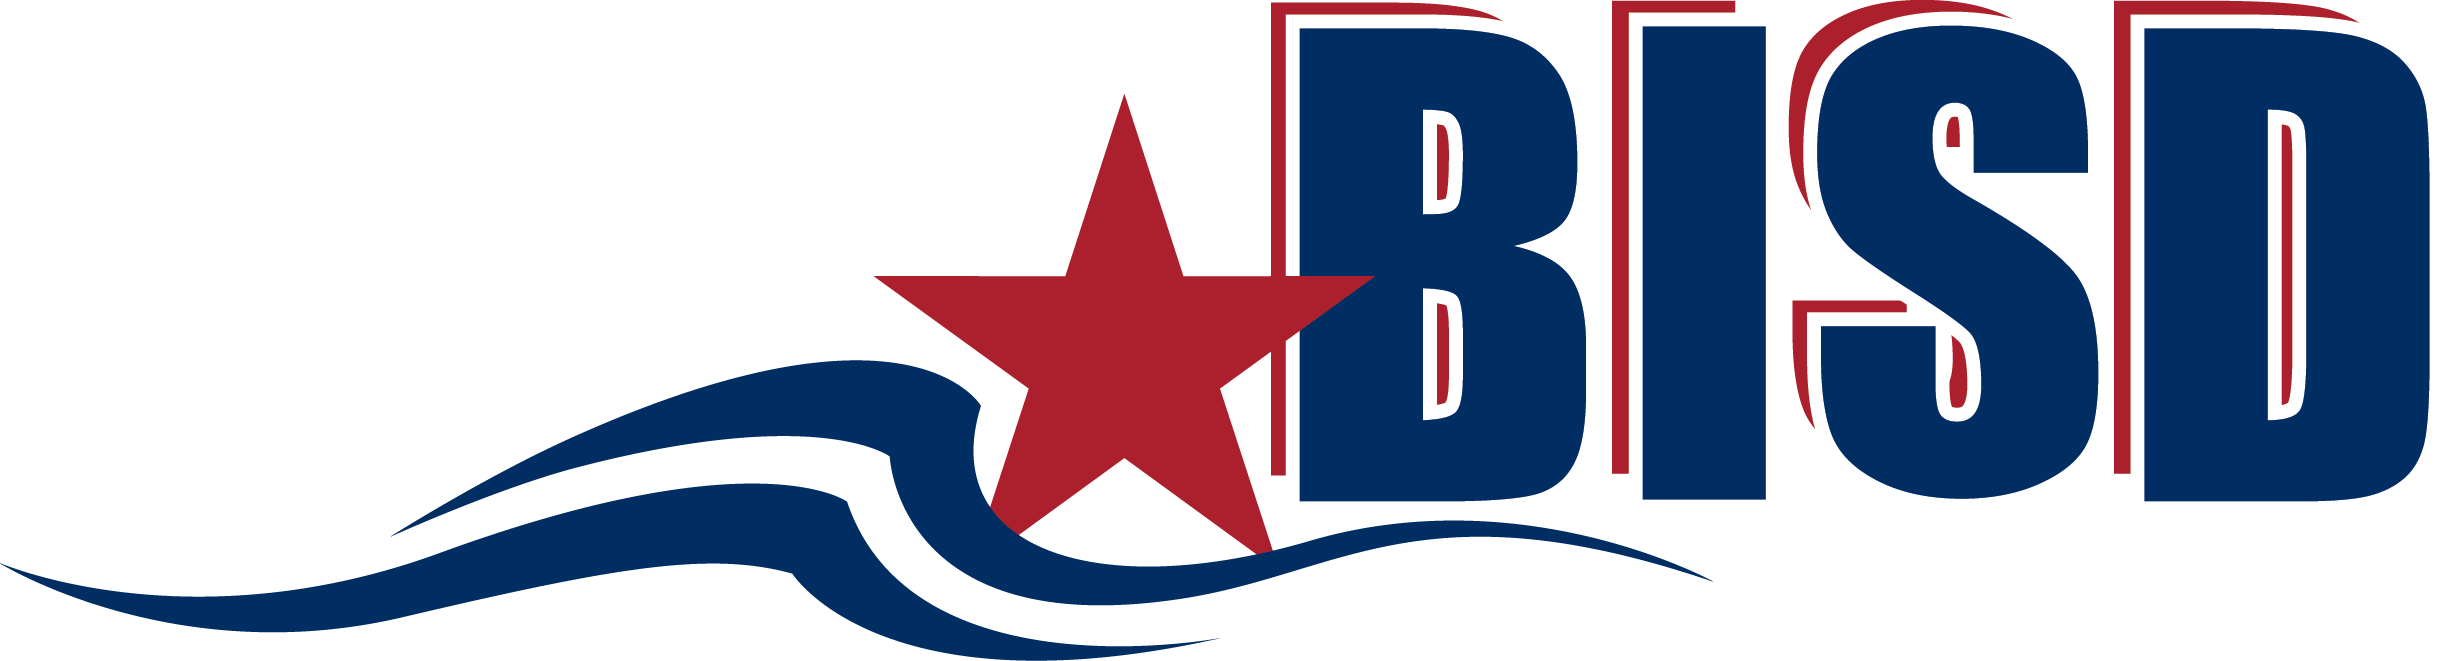 This Is The Image For The News Article Titled Bisd - Brazosport Isd Logo (2444x661)